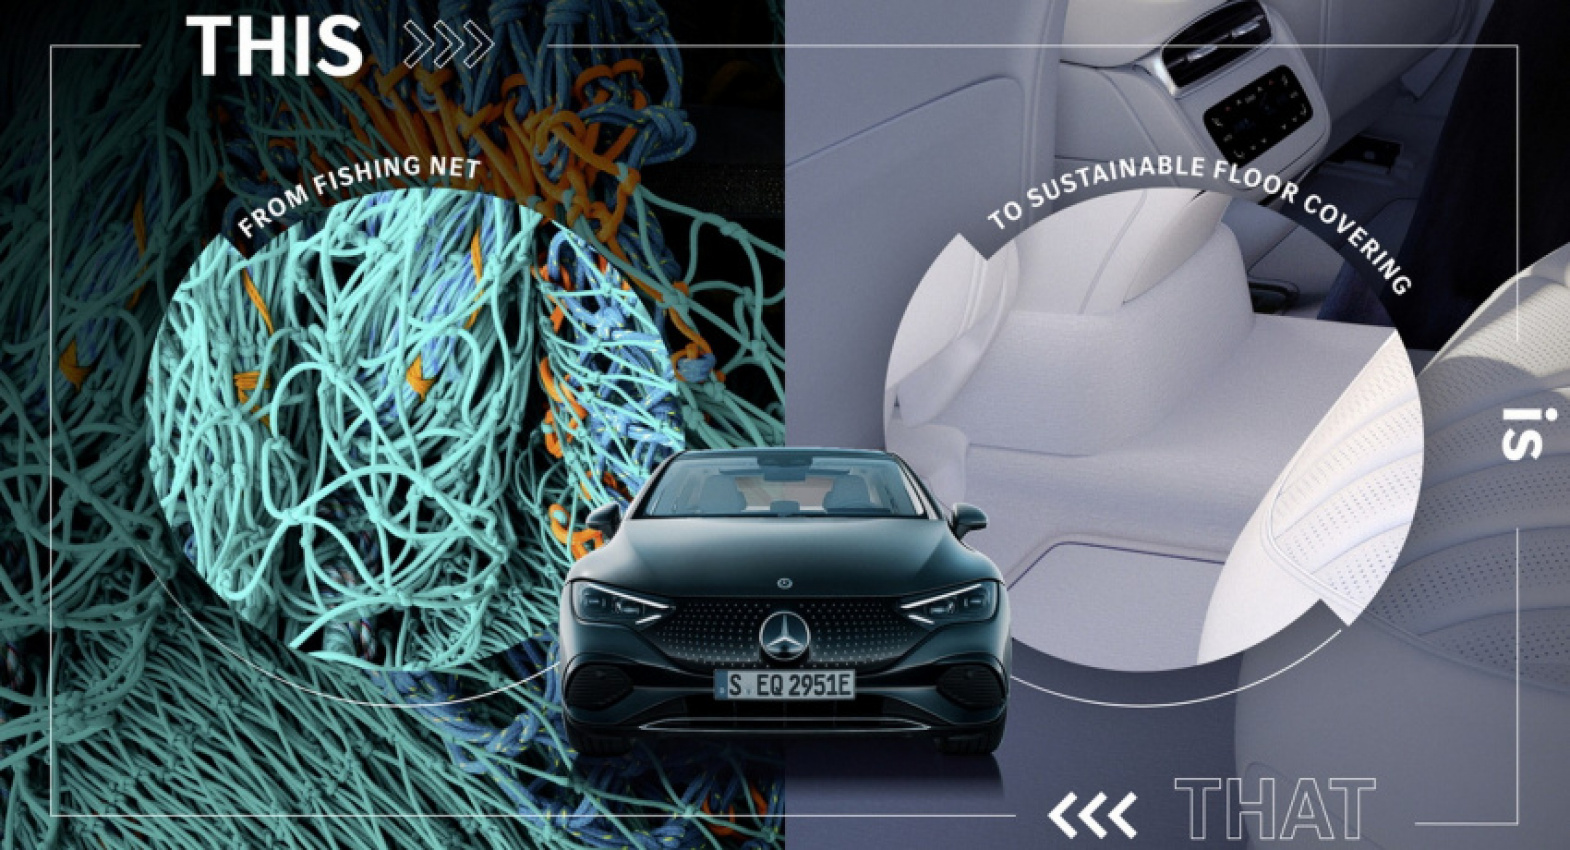 autos, cars, mercedes-benz, automotive industry, car, cars, driven, driven nz, green, mercedes, motoring, new zealand, news, nz, mercedes cars will be made from 40% recycled materials within 10 years